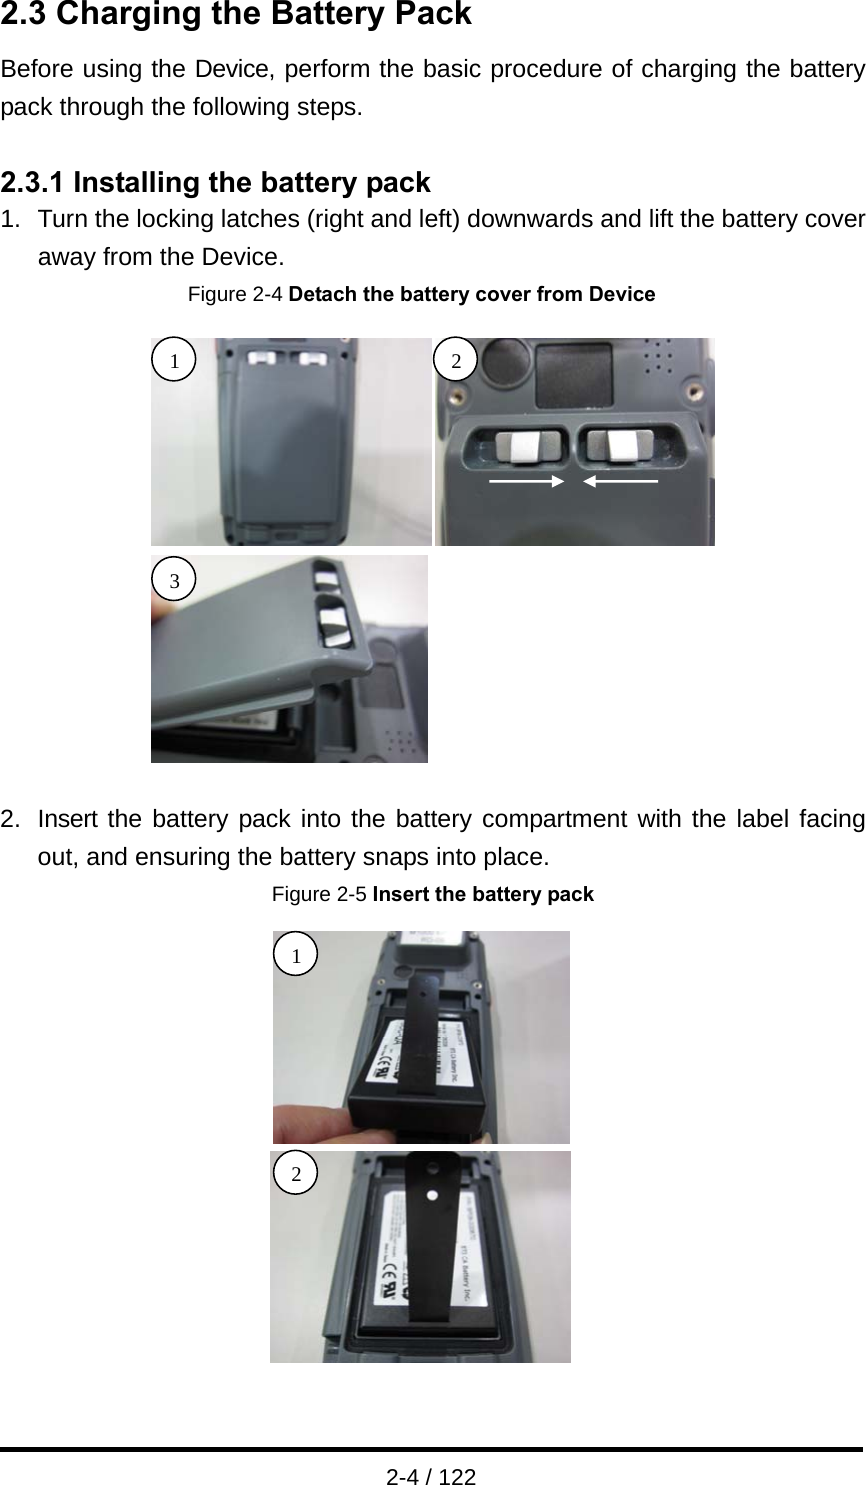  2-4 / 122 2.3 Charging the Battery Pack Before using the Device, perform the basic procedure of charging the battery pack through the following steps.  2.3.1 Installing the battery pack 1.  Turn the locking latches (right and left) downwards and lift the battery cover away from the Device. Figure 2-4 Detach the battery cover from Device  2.  Insert the battery pack into the battery compartment with the label facing out, and ensuring the battery snaps into place.   Figure 2-5 Insert the battery pack  1 2 1 23